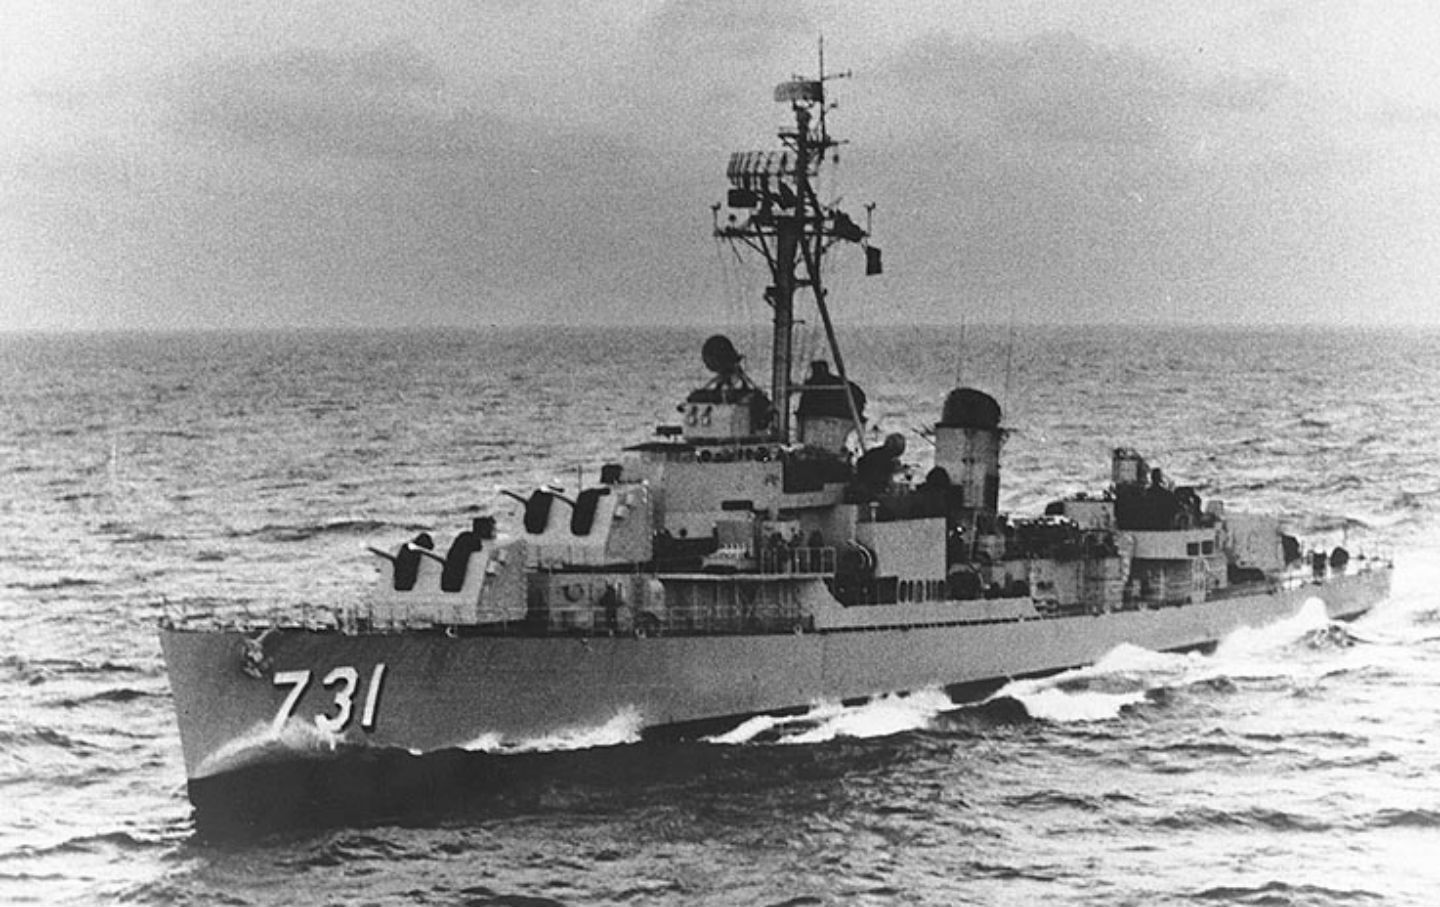 August 4, 1964: The Gulf of Tonkin ‘Incident’ Sparks American Escalation in Vietnam